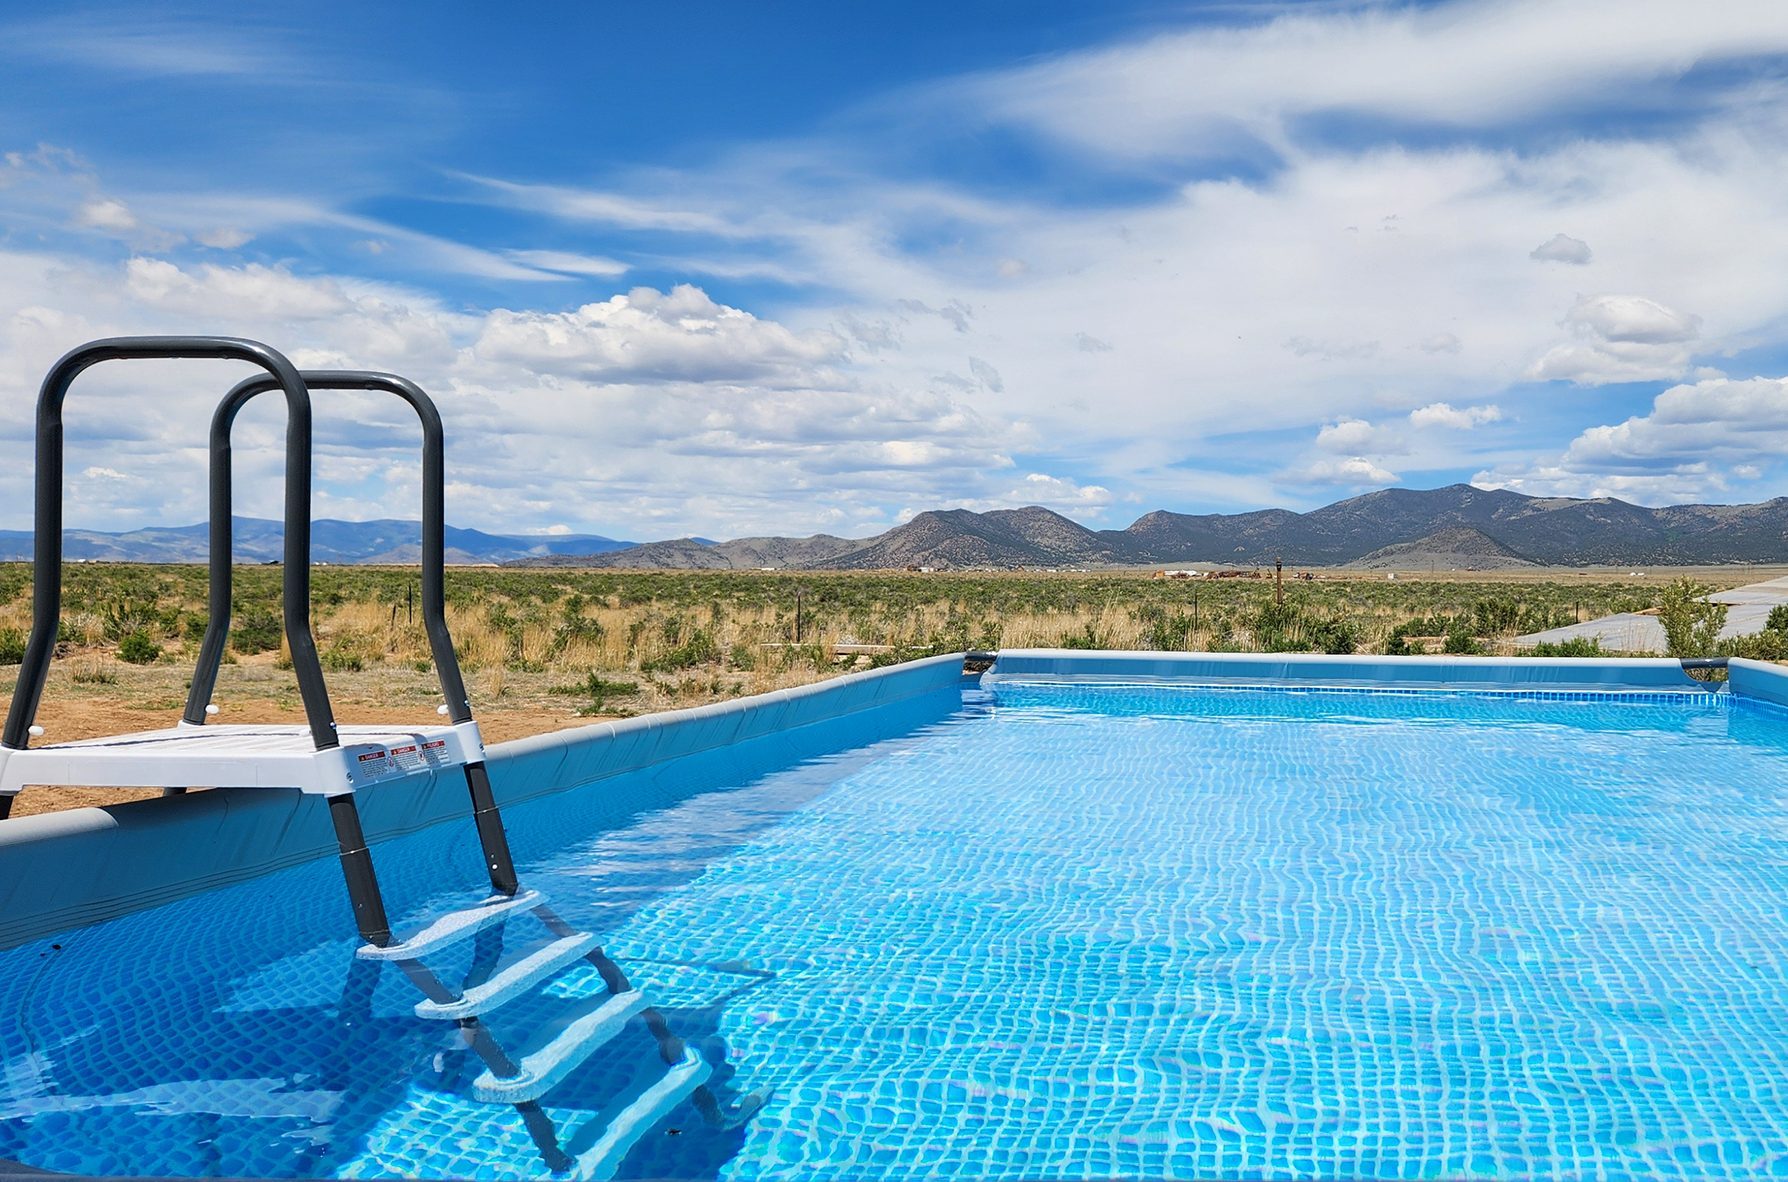 8 Best Above-Ground Pools for Warm Weather Fun